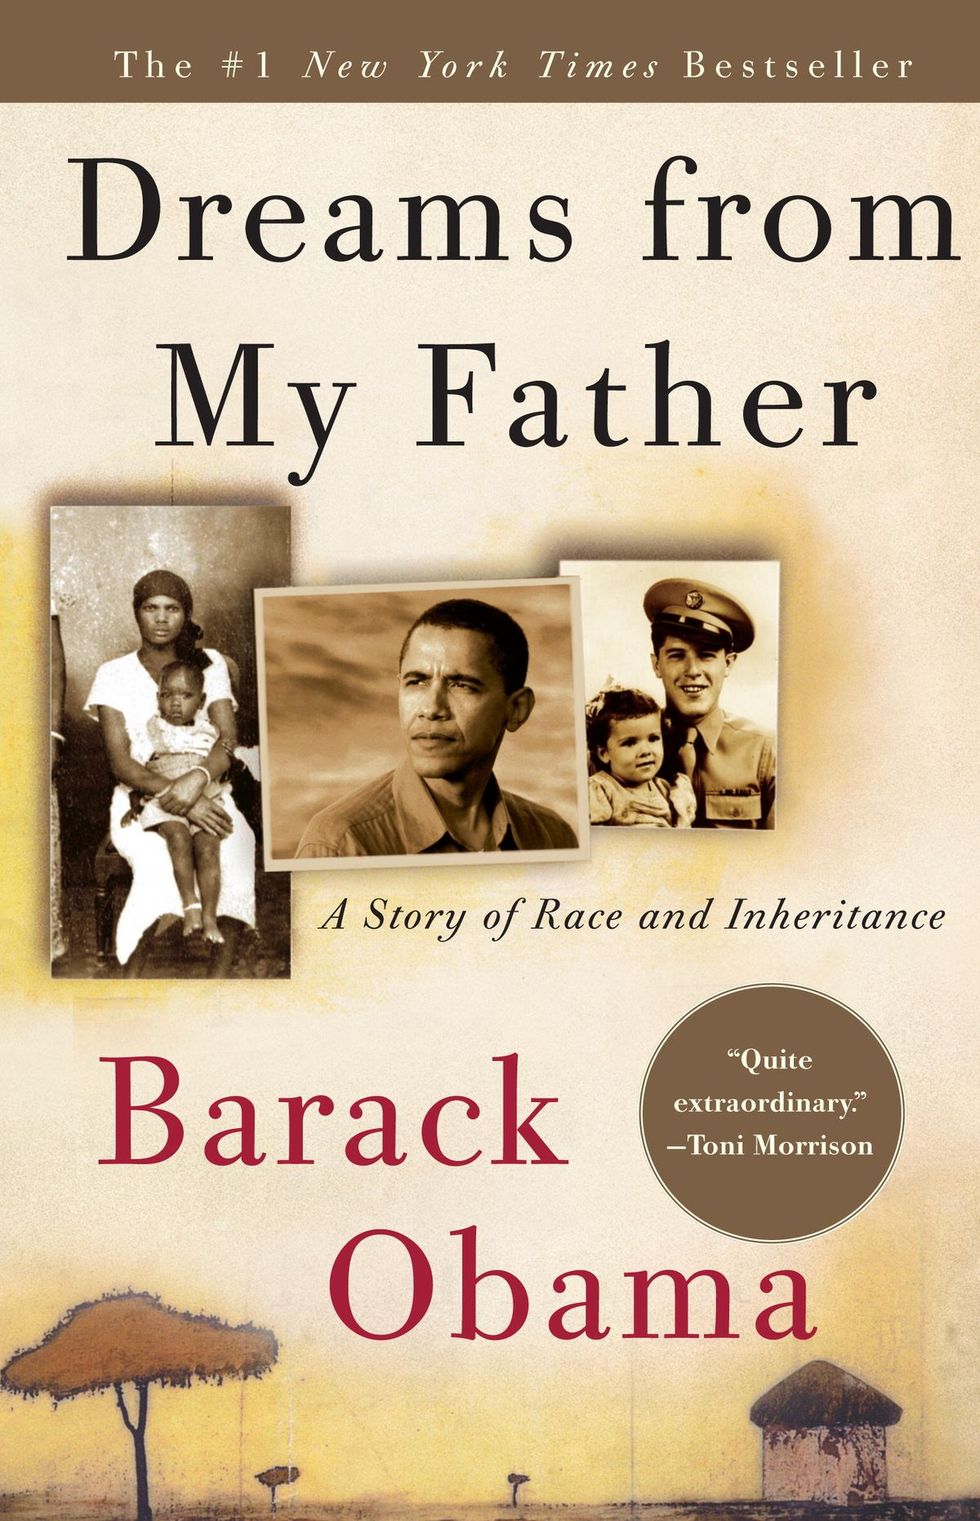 dreams from my father a story of race and inheritance ﻿by barack obama﻿